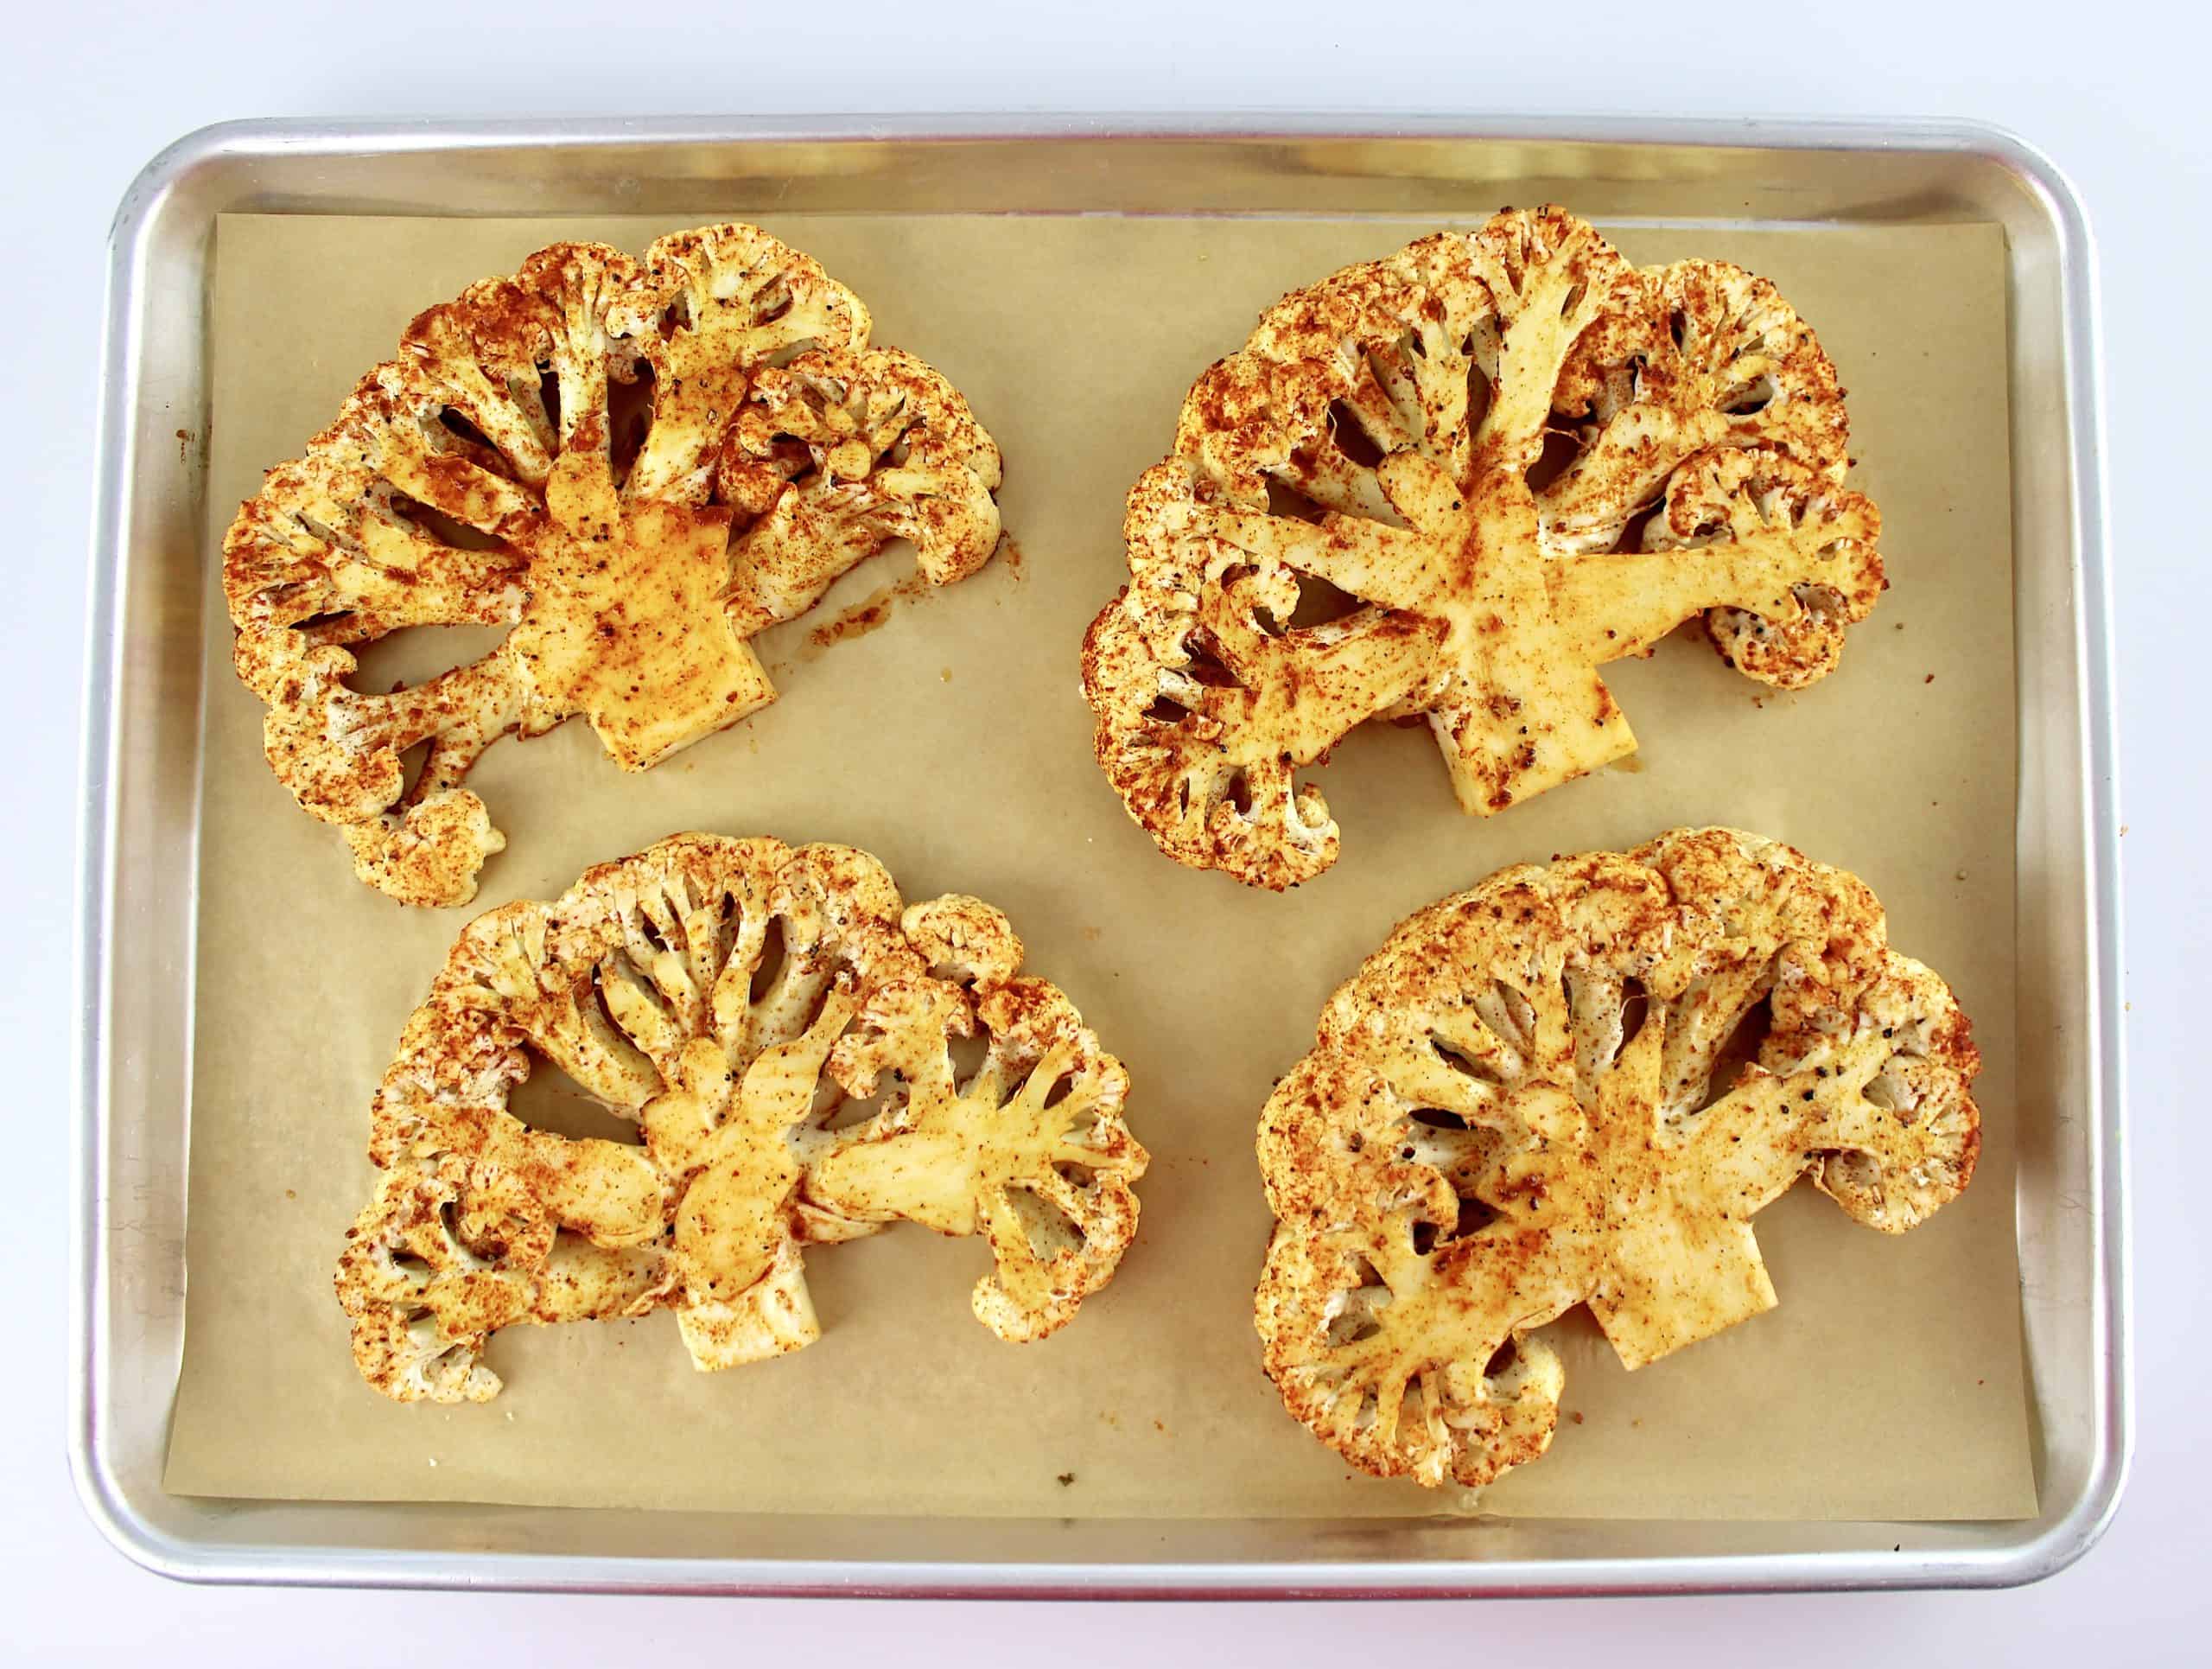 4 cauliflower steaks with seasoning on baking sheet with parchment paper uncooked